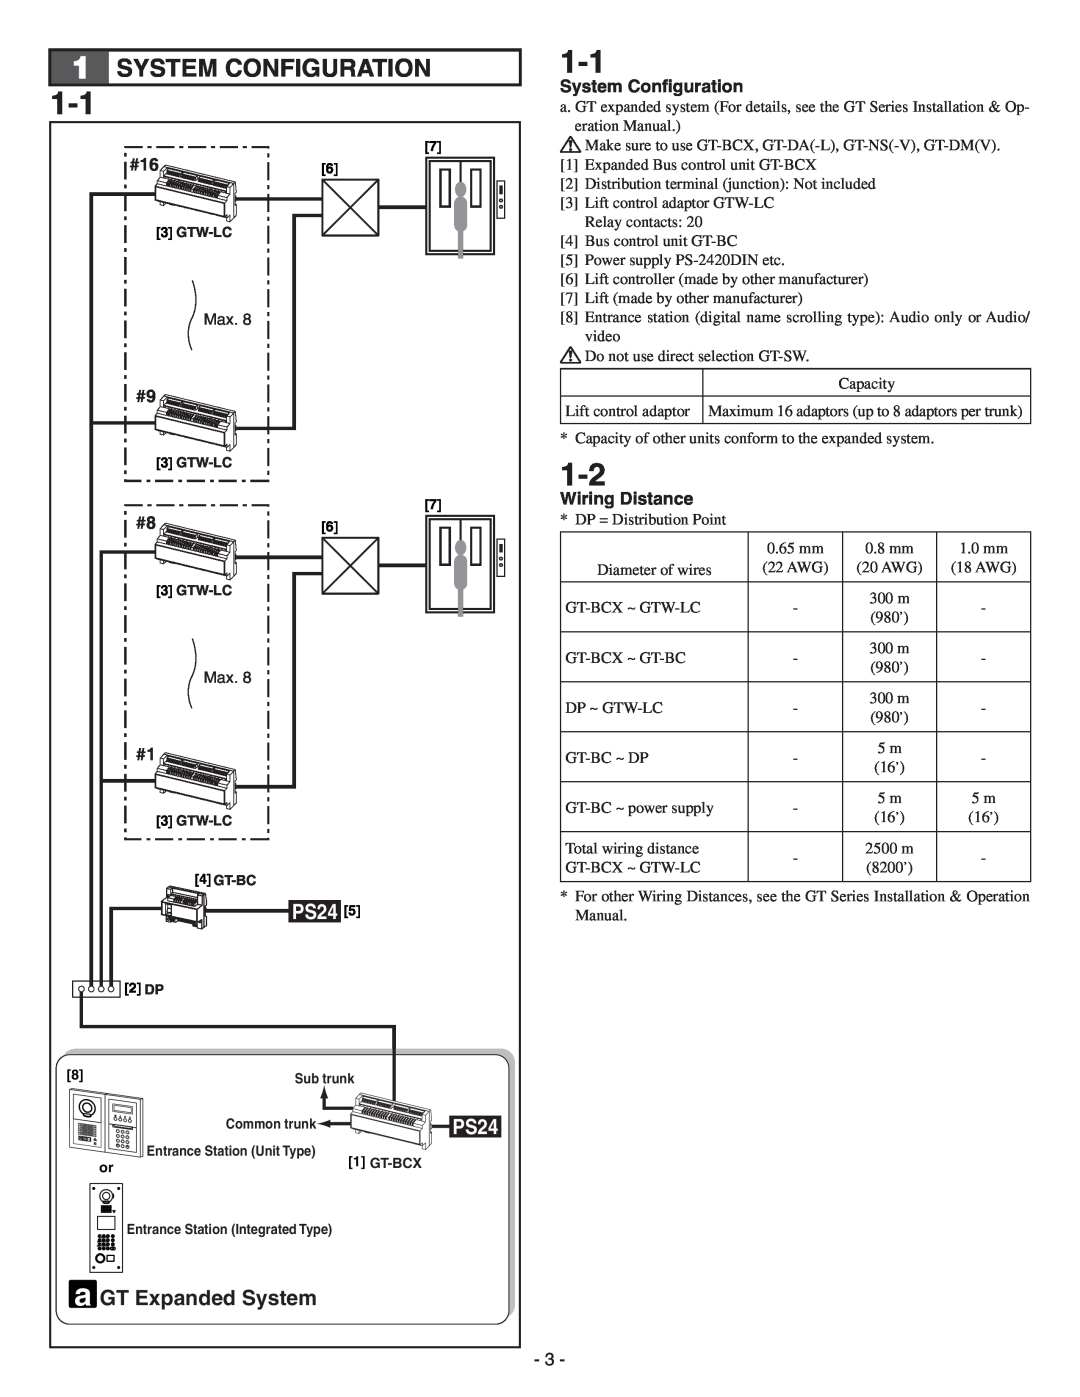 Aiphone GTW-LC service manual System Configuration, PS24, a GT Expanded System, System Conﬁguration, Wiring Distance 